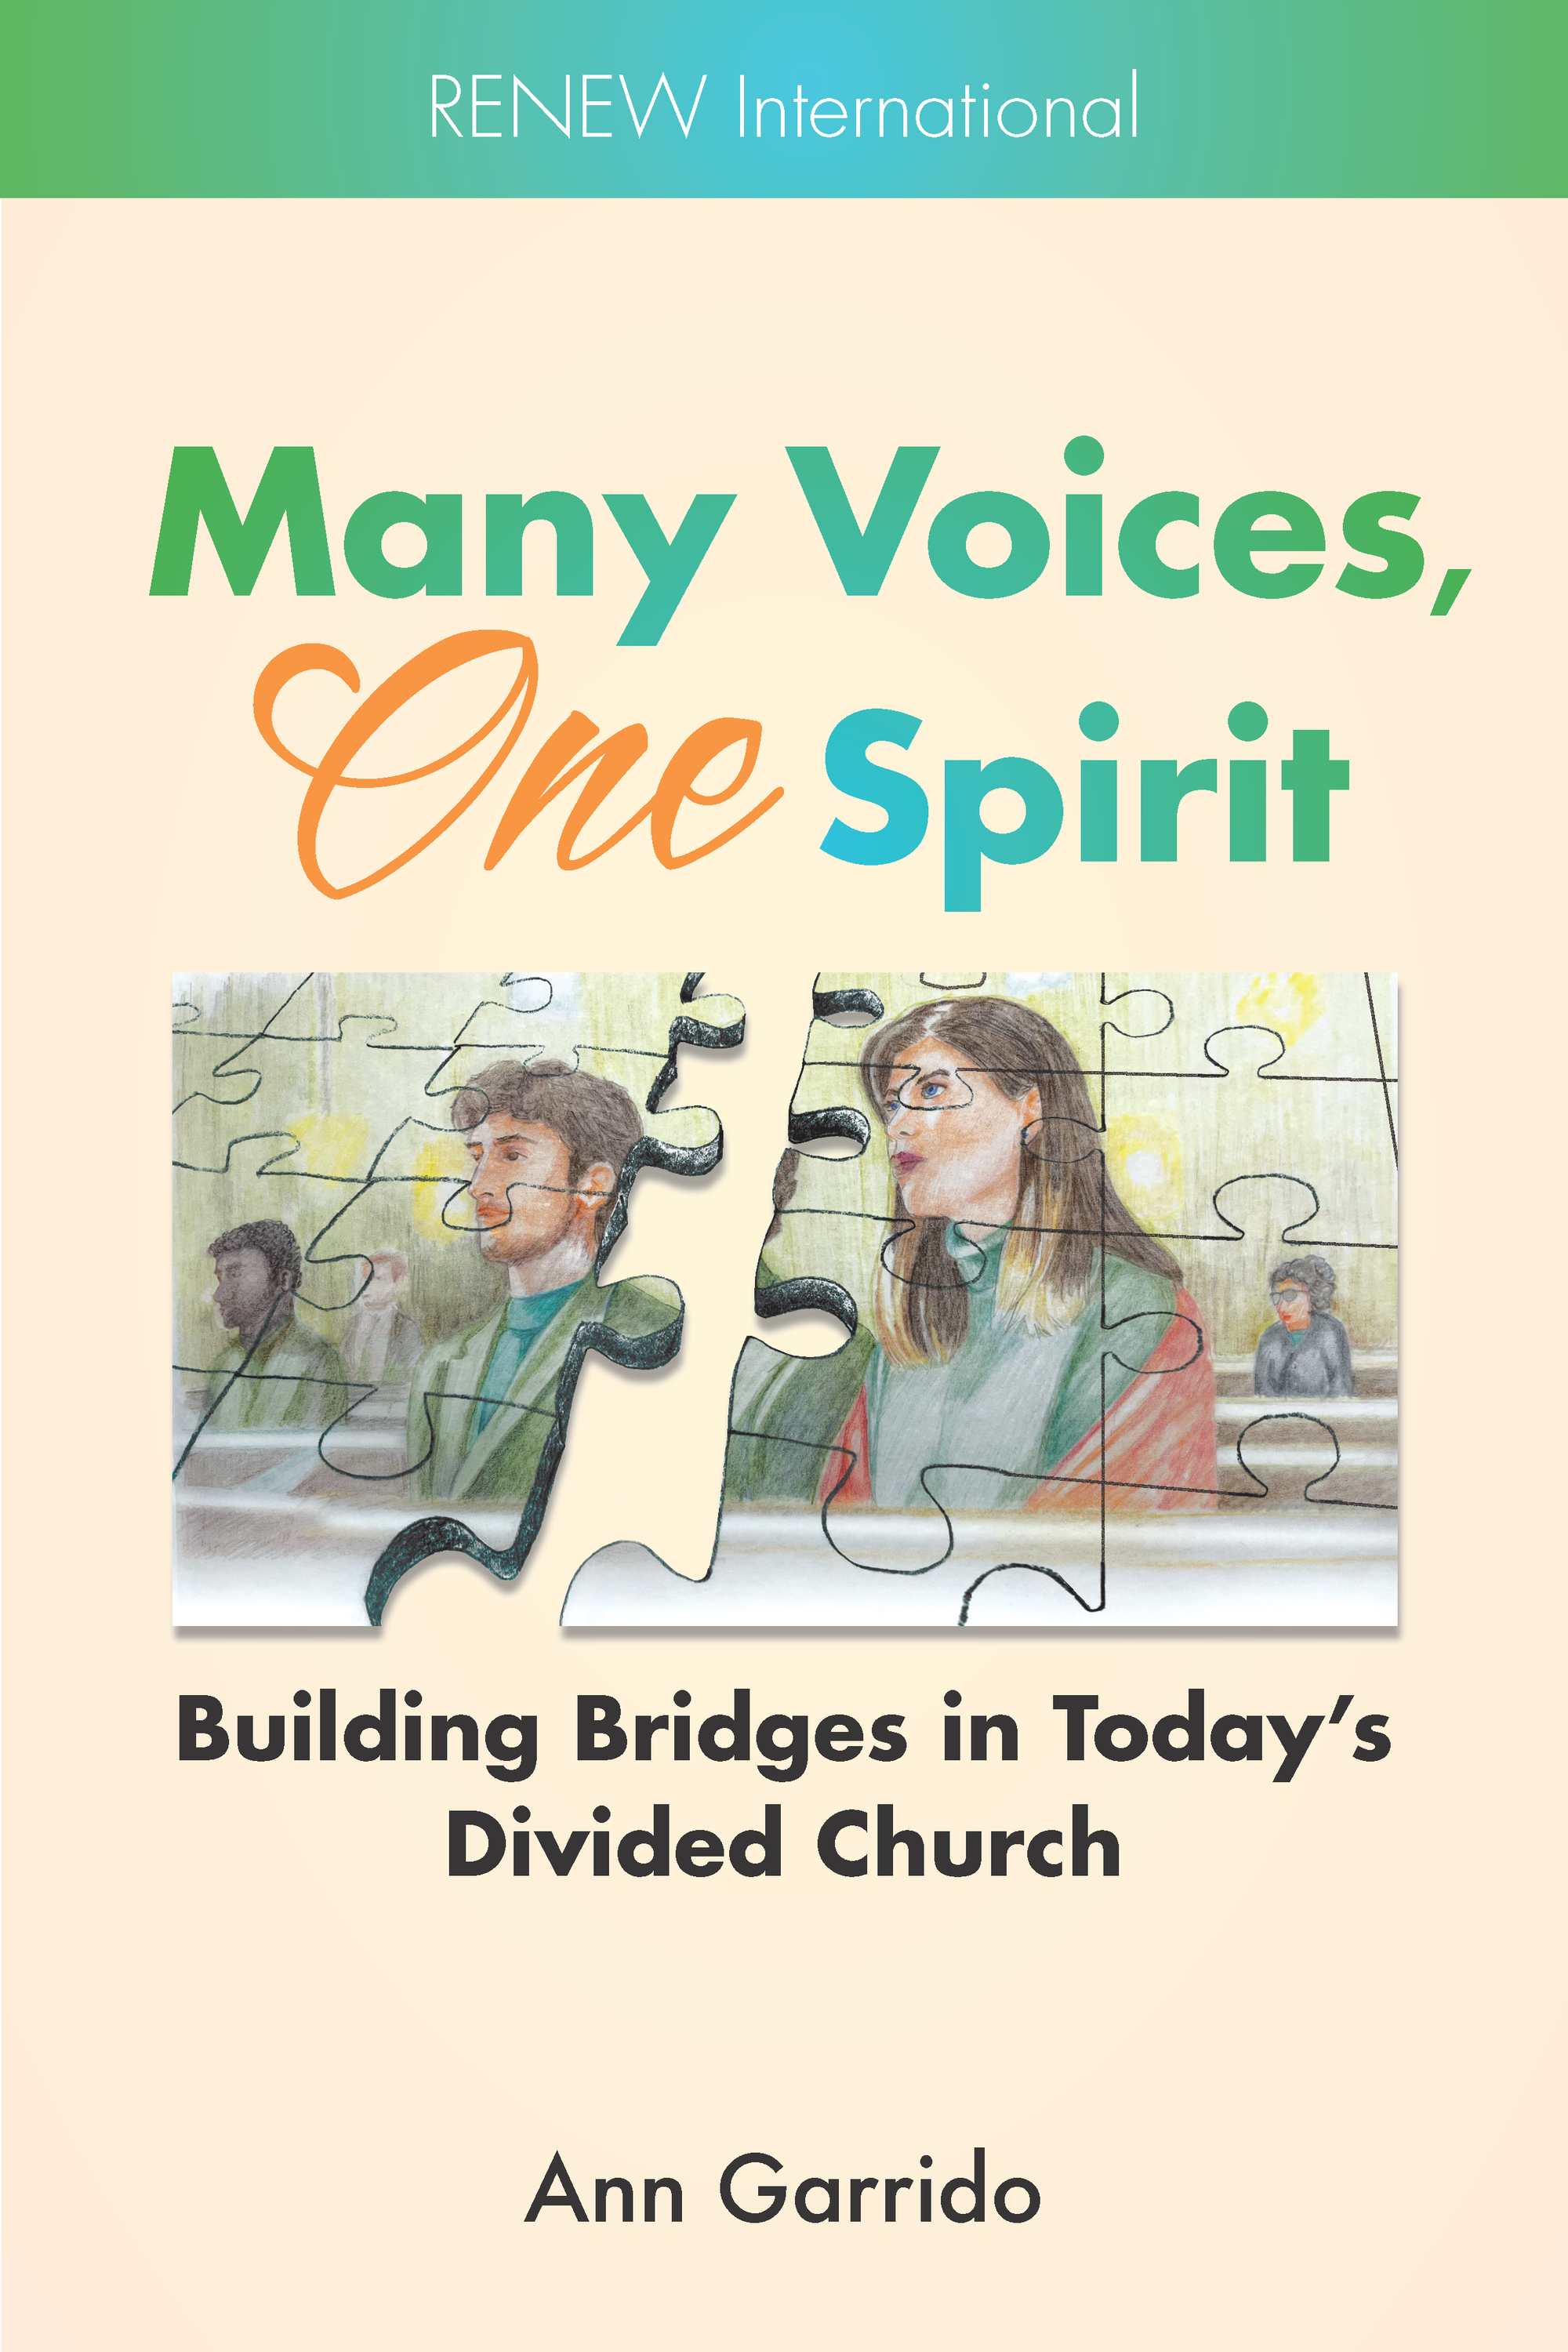 Many Voices, One Spirit: Building Bridges in Today's Divided Church